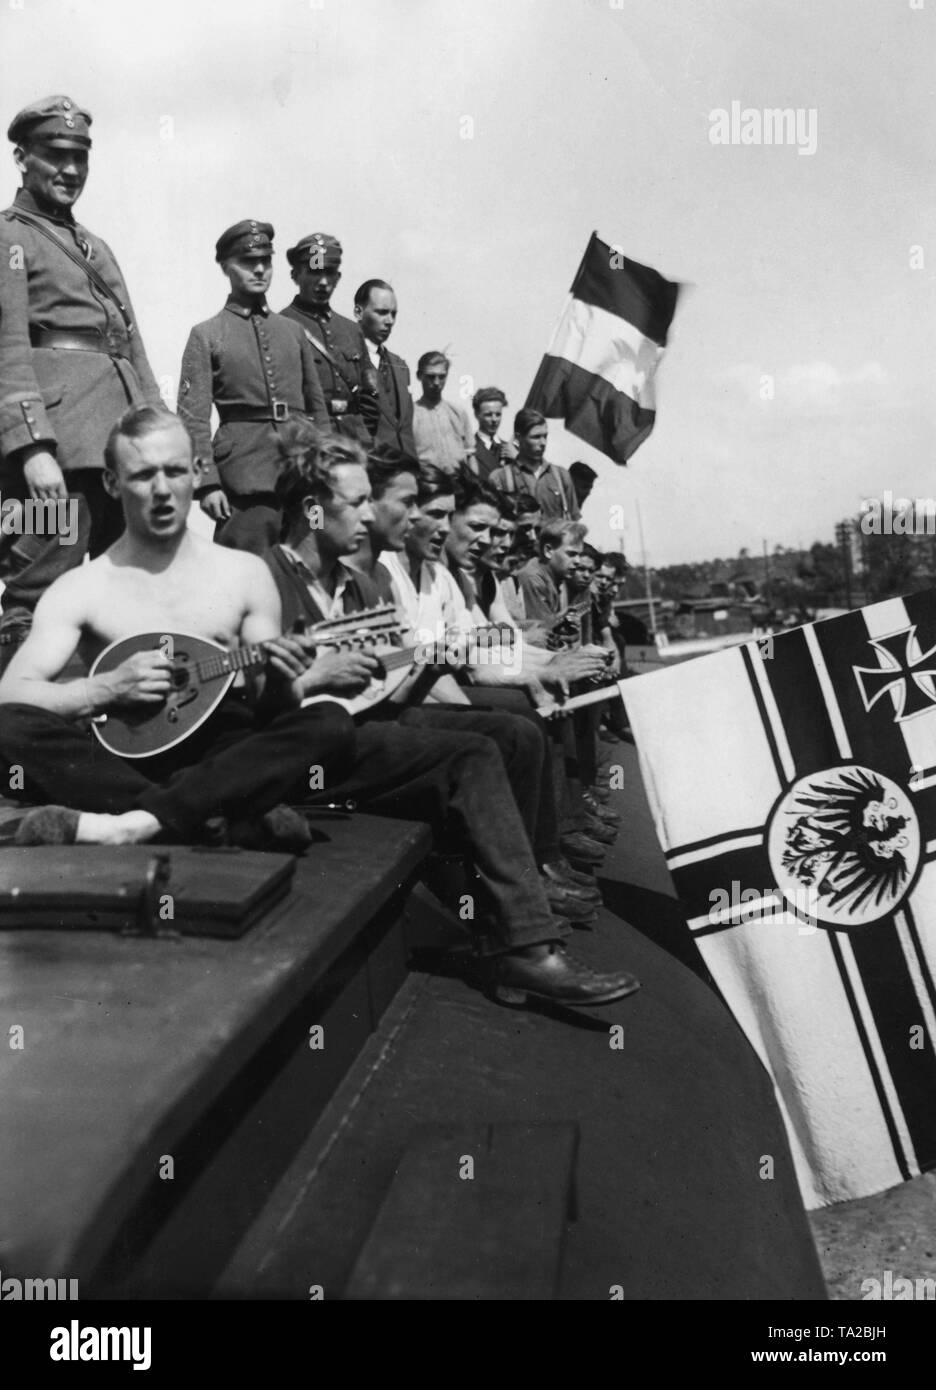 Workers of the volunteer work service of the Stahlhelm sing and play music on a personnel carrier of the Deutsche Reichsbahn (German National Railway), which is parked at the goods station Berlin-Koepenick as a sleeping car with kitchen. Beside the black-white-red imperial flag, the former imperial war flag of the German Empire. Stock Photo